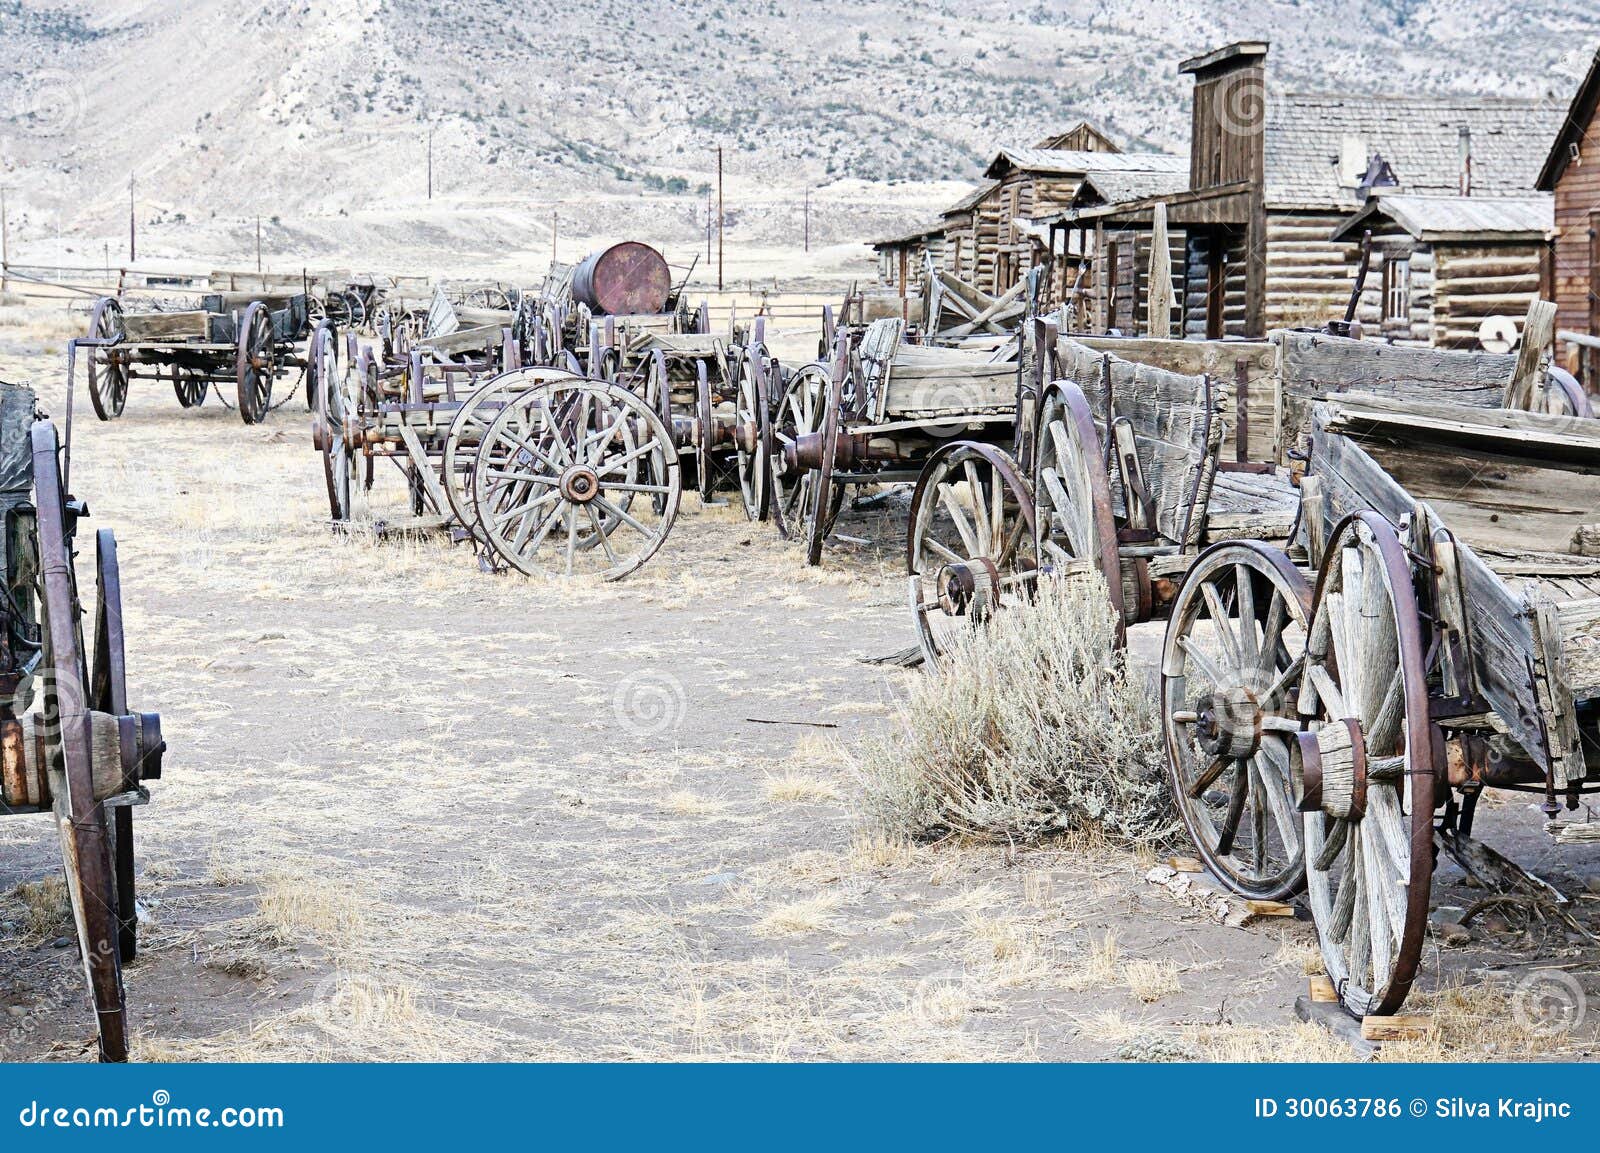 old wooden wagons in a ghost town cody, wyoming, united states